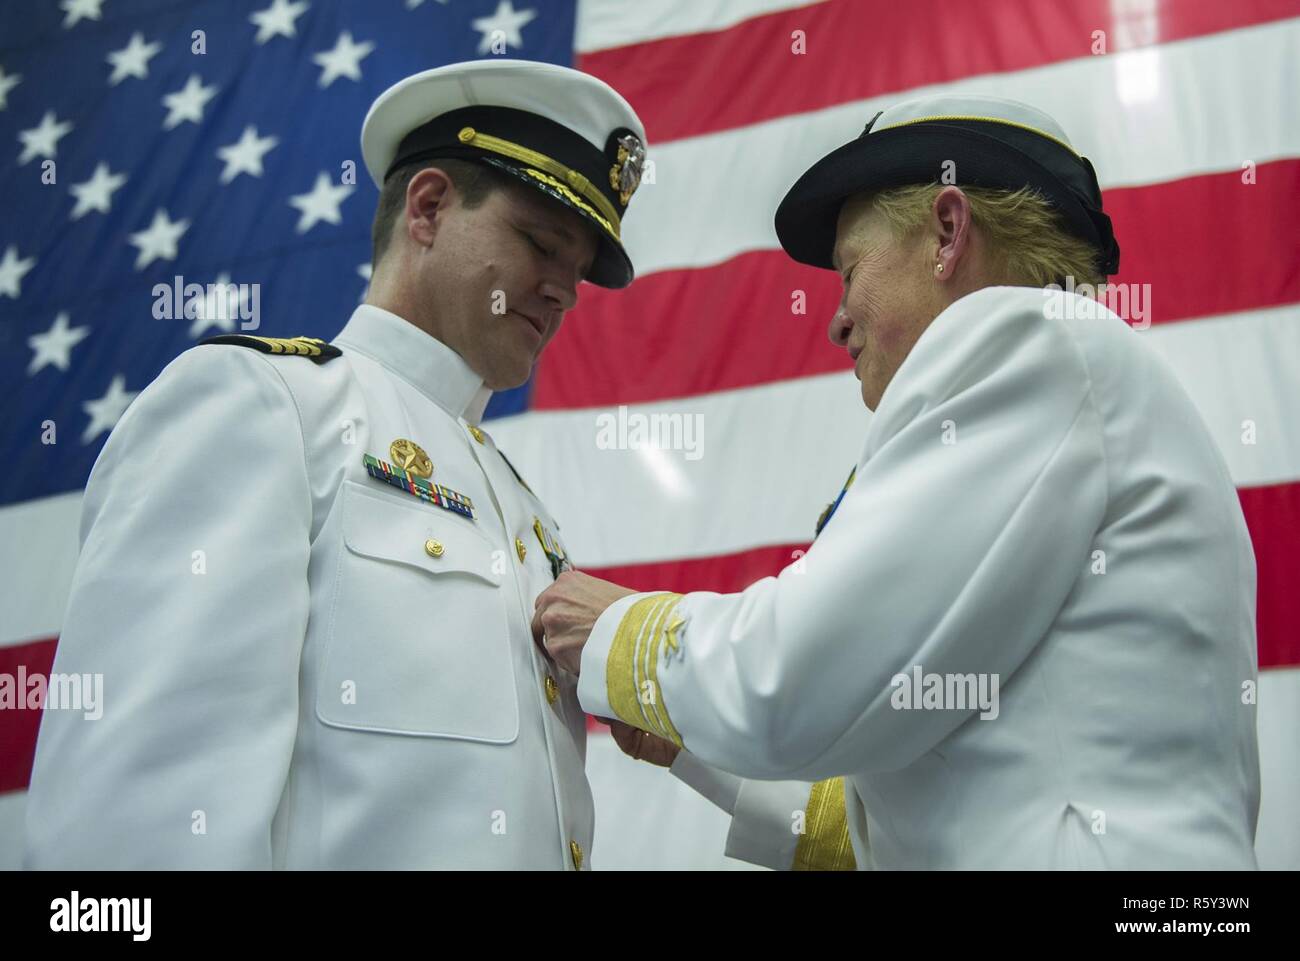 SAN DIEGO (April 20, 2017) Vice Adm. Nora Tyson, commander of U.S. 3rd fleet, presents an end-of-tour award to Capt. Homer Denius III, commander of Amphibious Squadron (PHIBRON) 3 during a change of command in the hangar bay aboard the amphibious assault ship USS America (LHA 6). America is an aviation centric amphibious assault ship that supports Marine aviation requirements, from small-scale contingency operations of an expeditionary strike group, to forcible entry missions in major theaters of war. Stock Photo